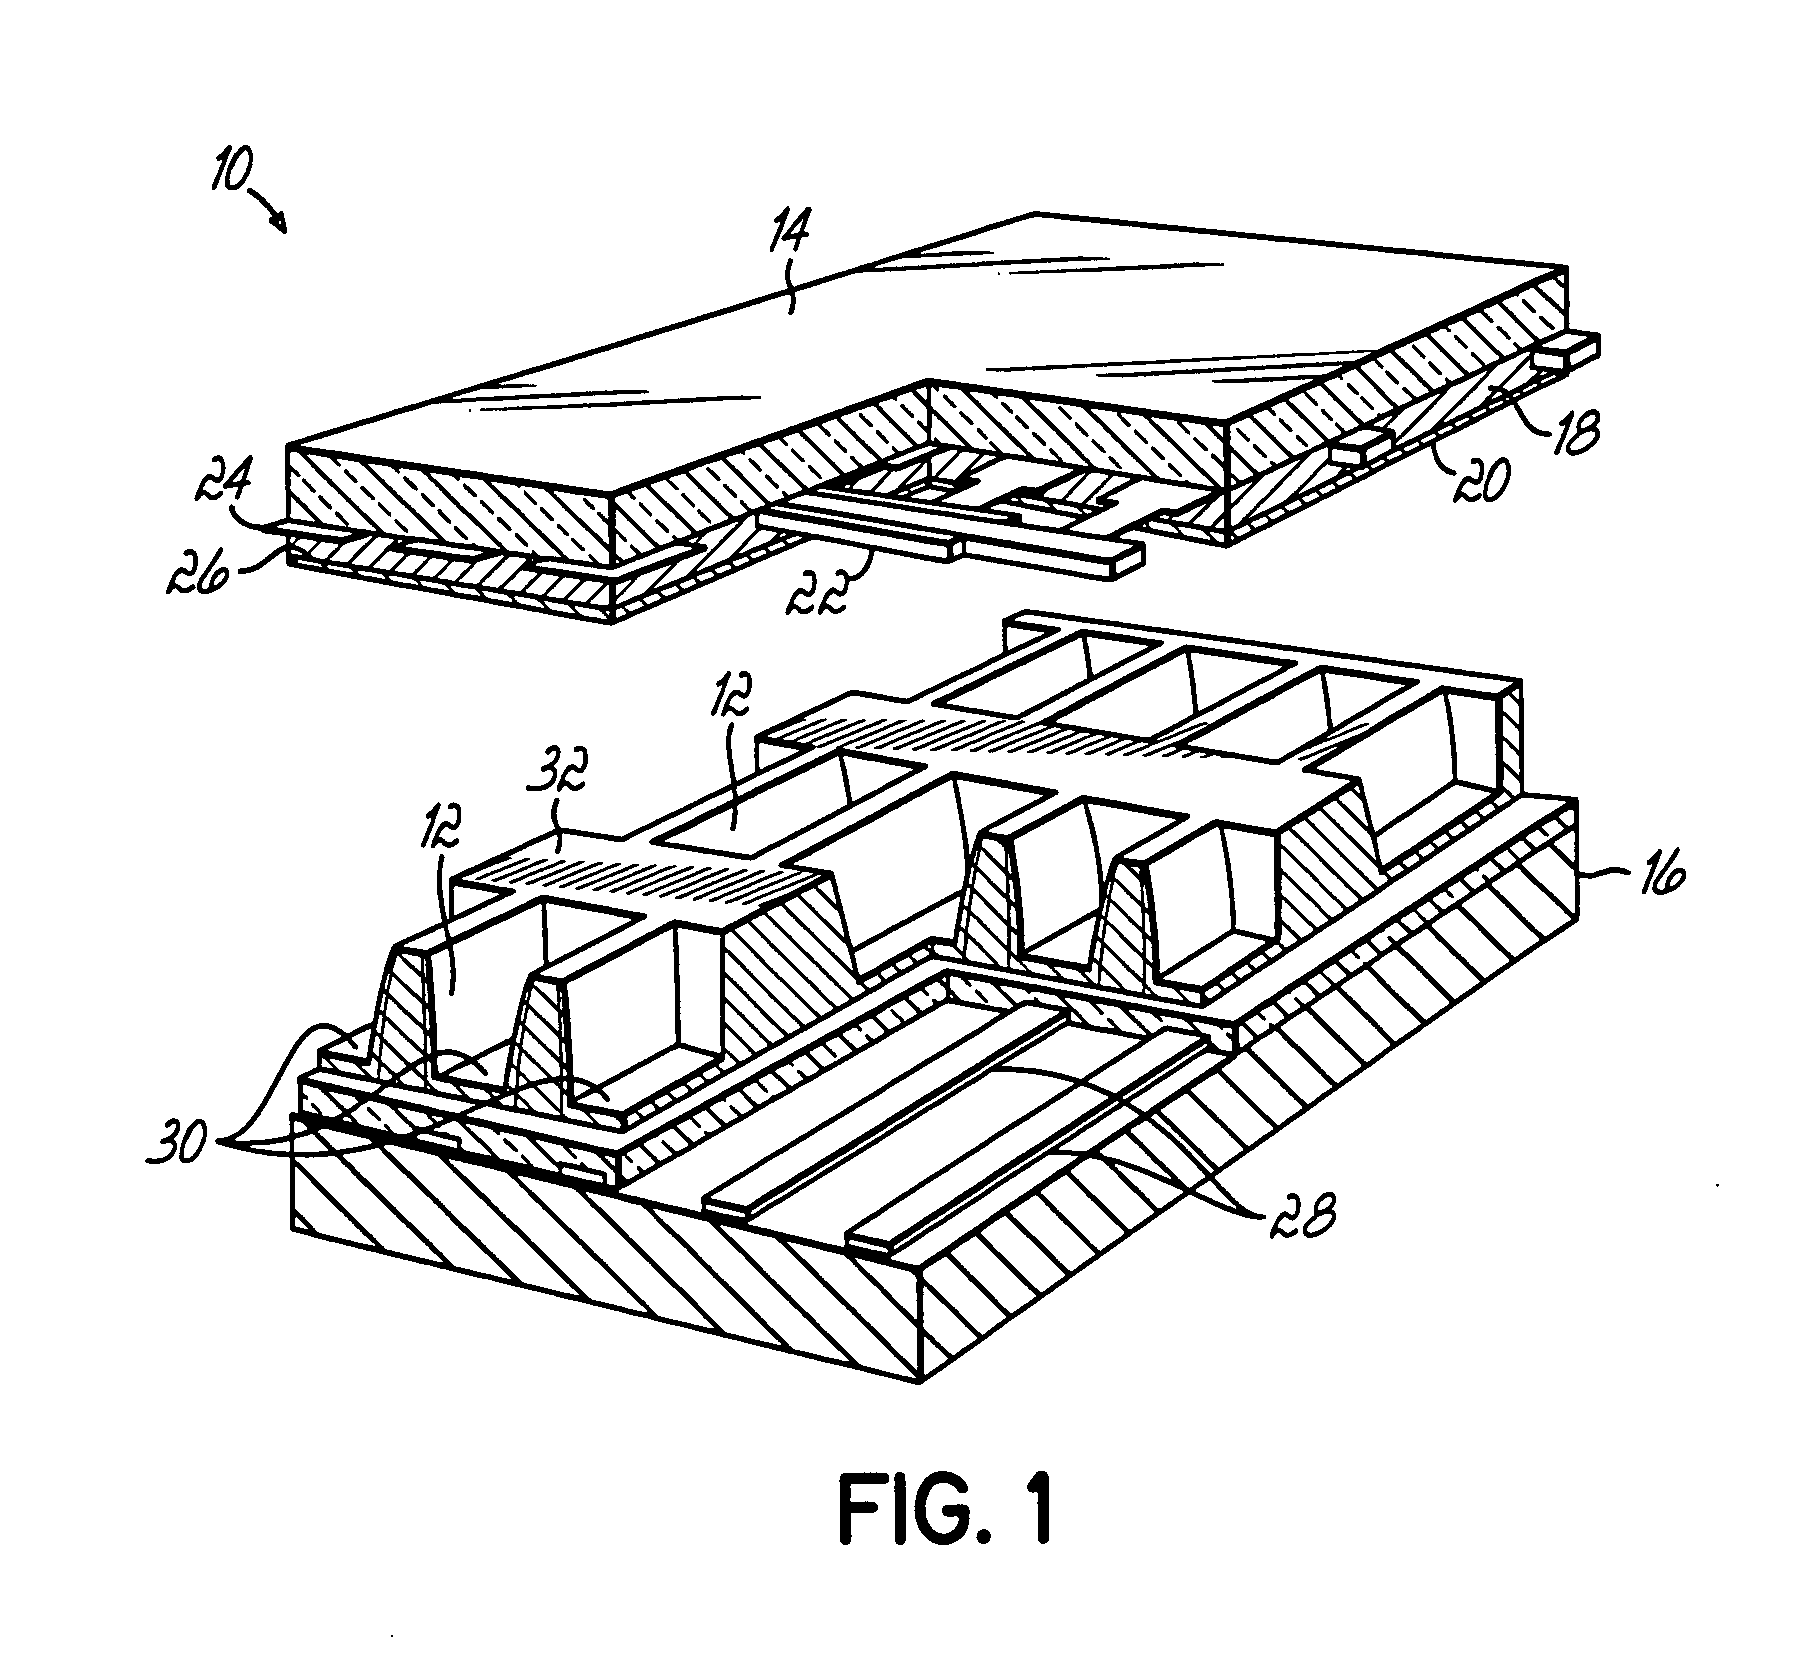 System for jetting phosphor for optical displays